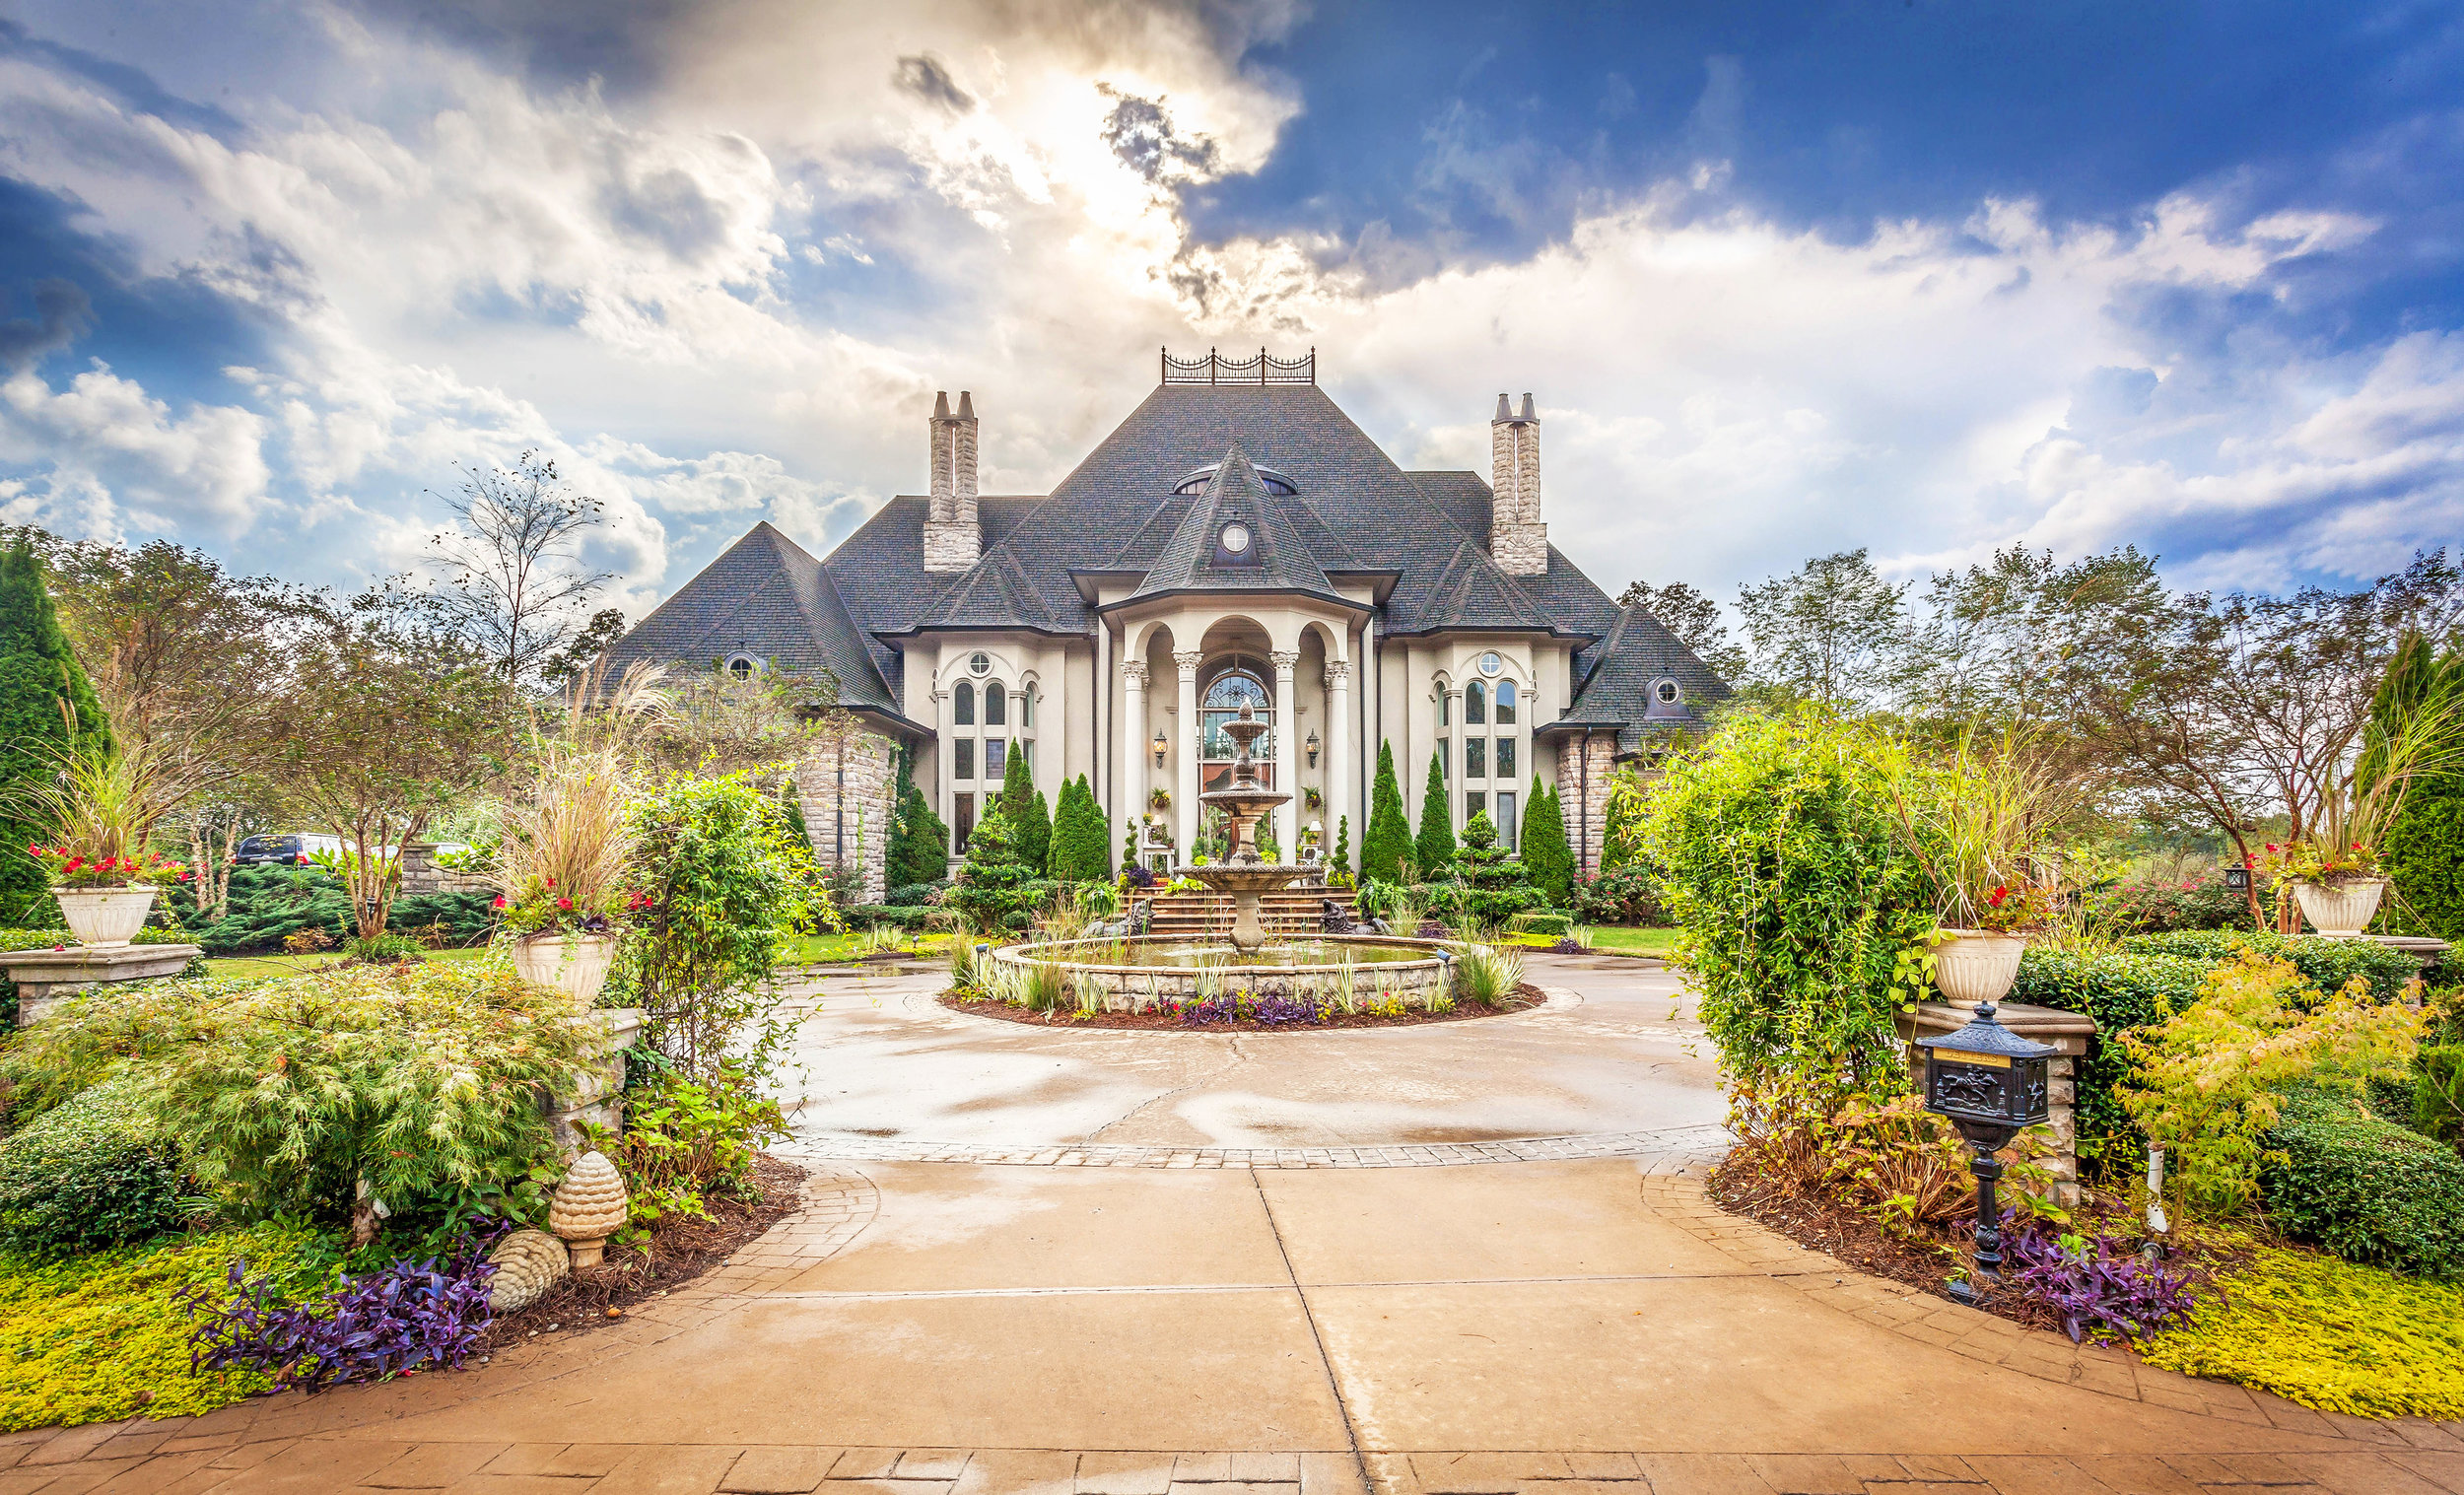 Dentville Mansion by 161 Photography